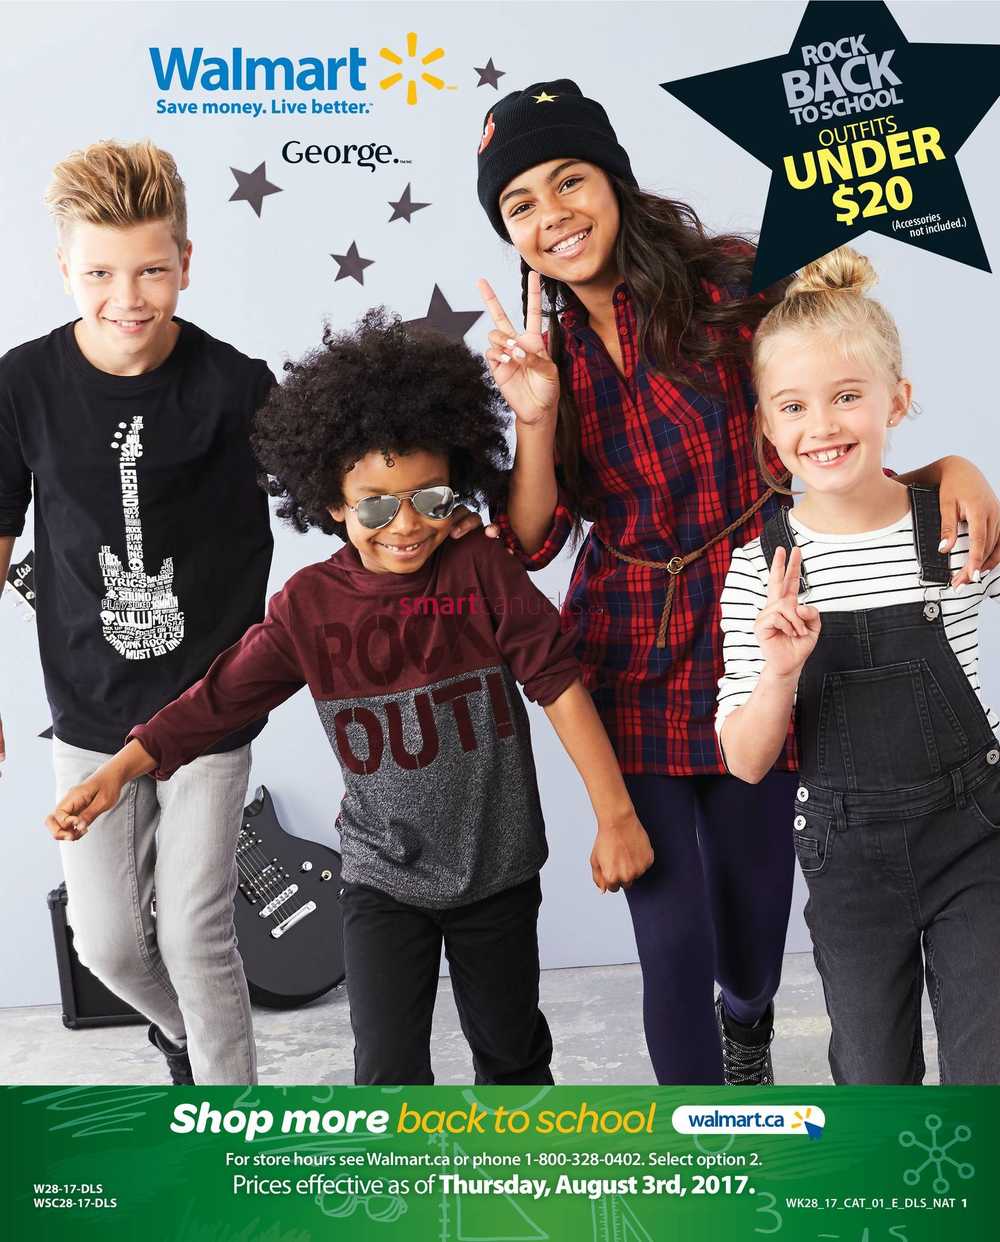 Walmart Rock Back to School Outfits Flyer August 3 to 9